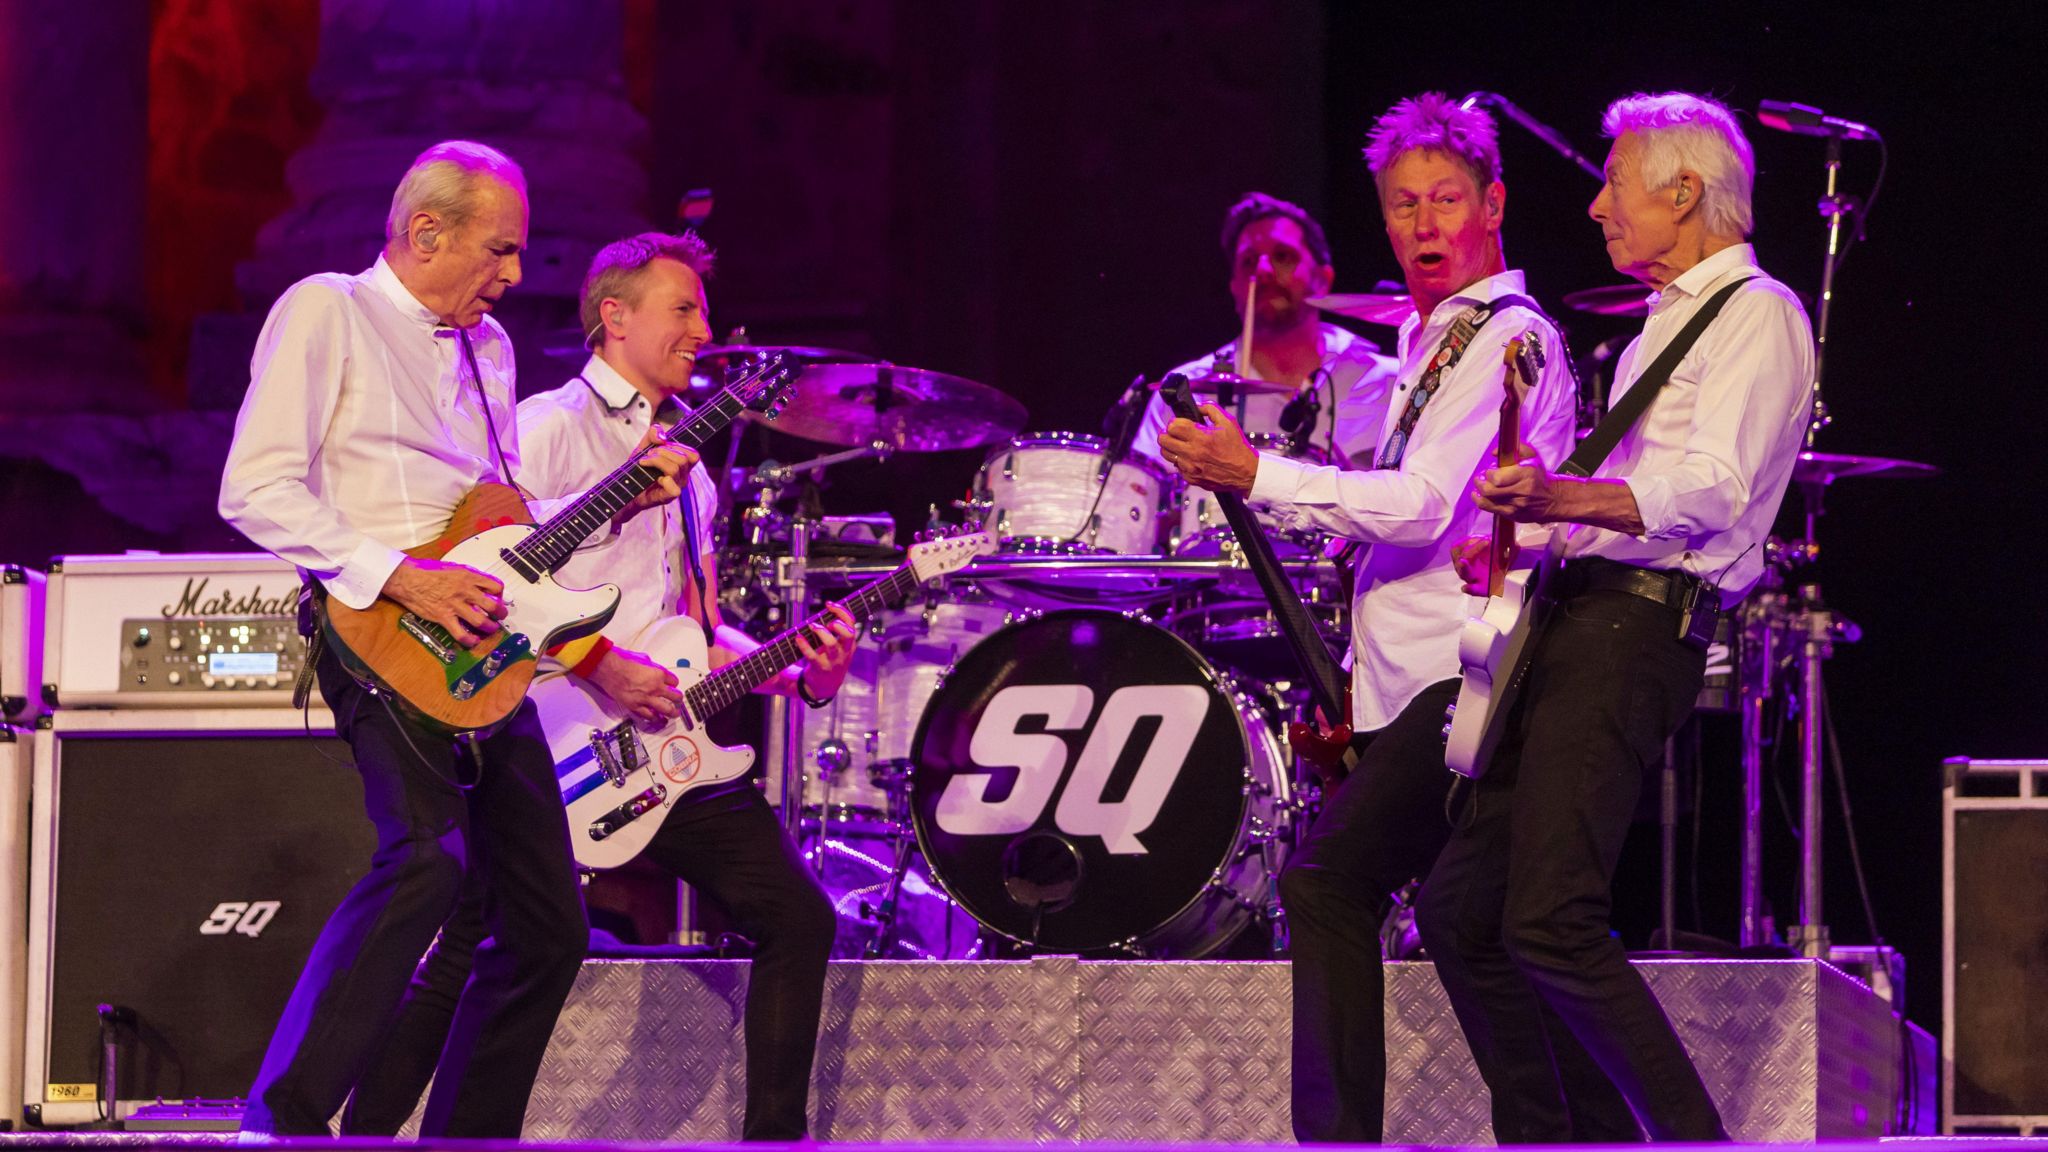 Current five members of Status Quo perform on stage